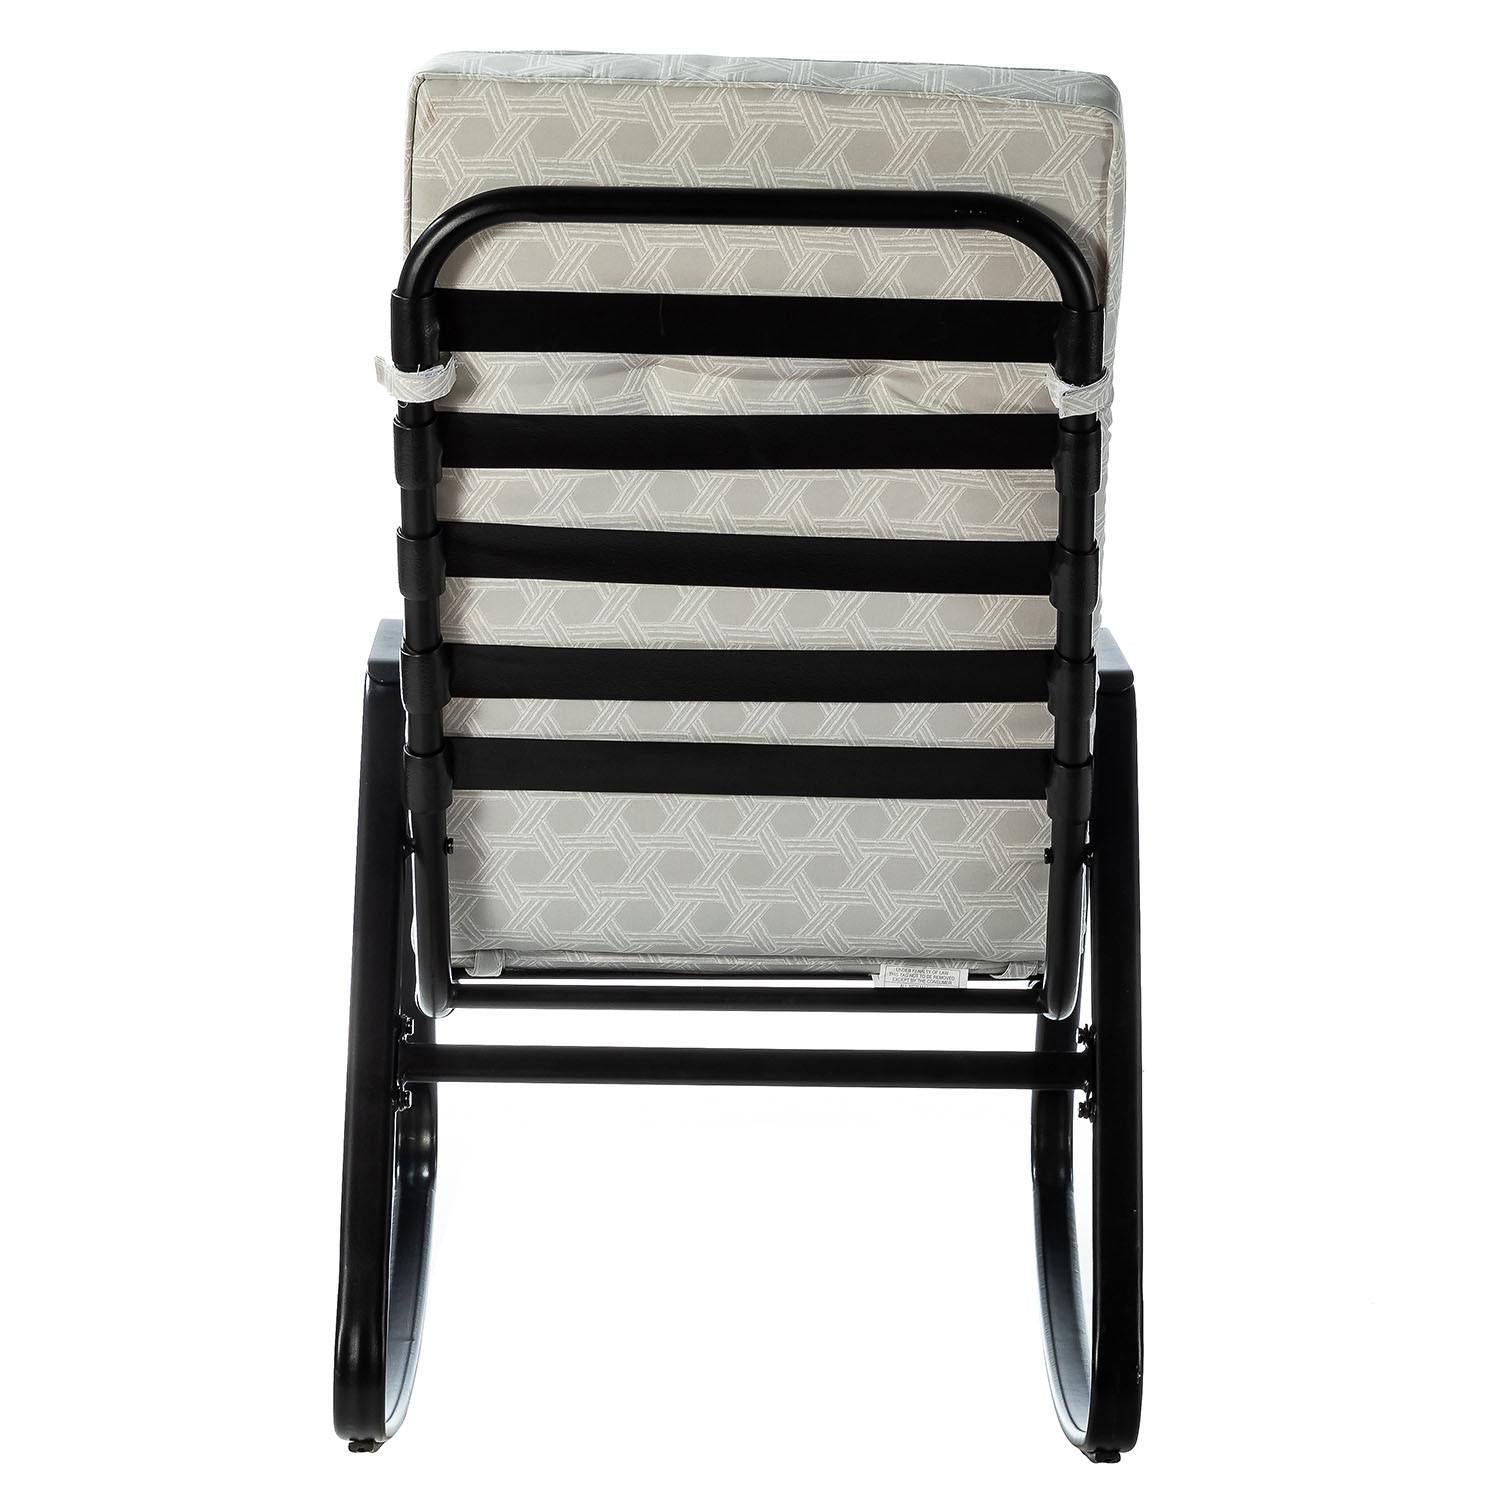 Black and Cream Outdoor Rocking Chair and Table Set